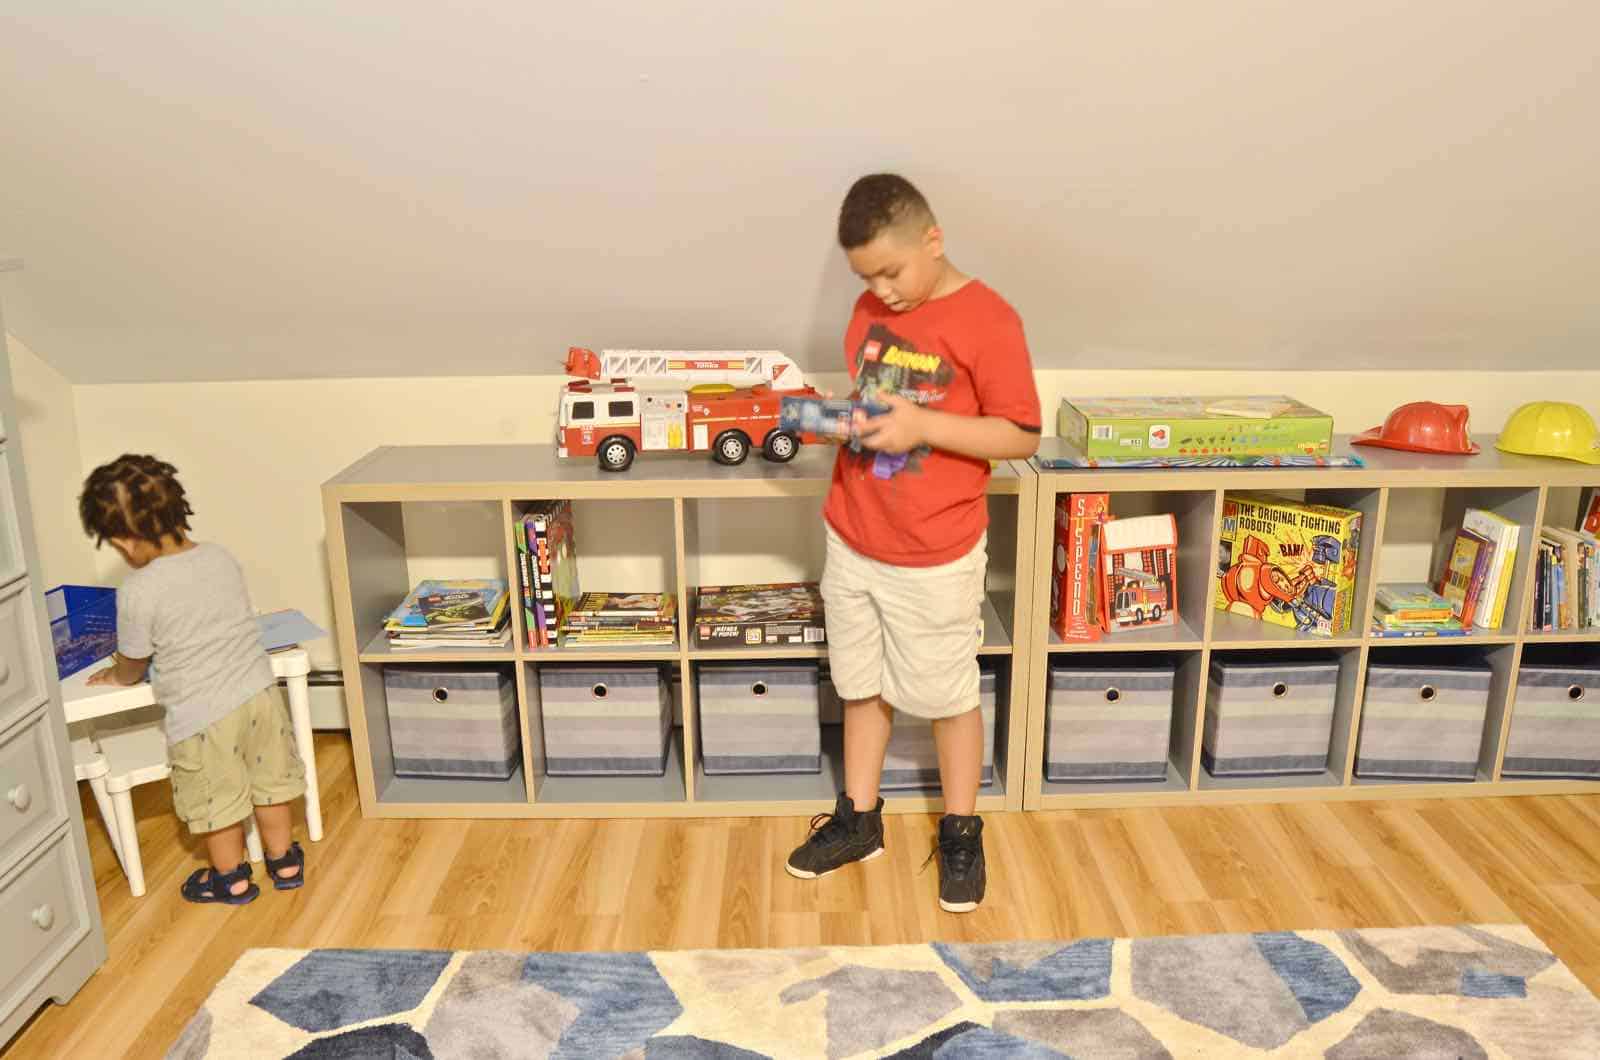 exploring toys in new room